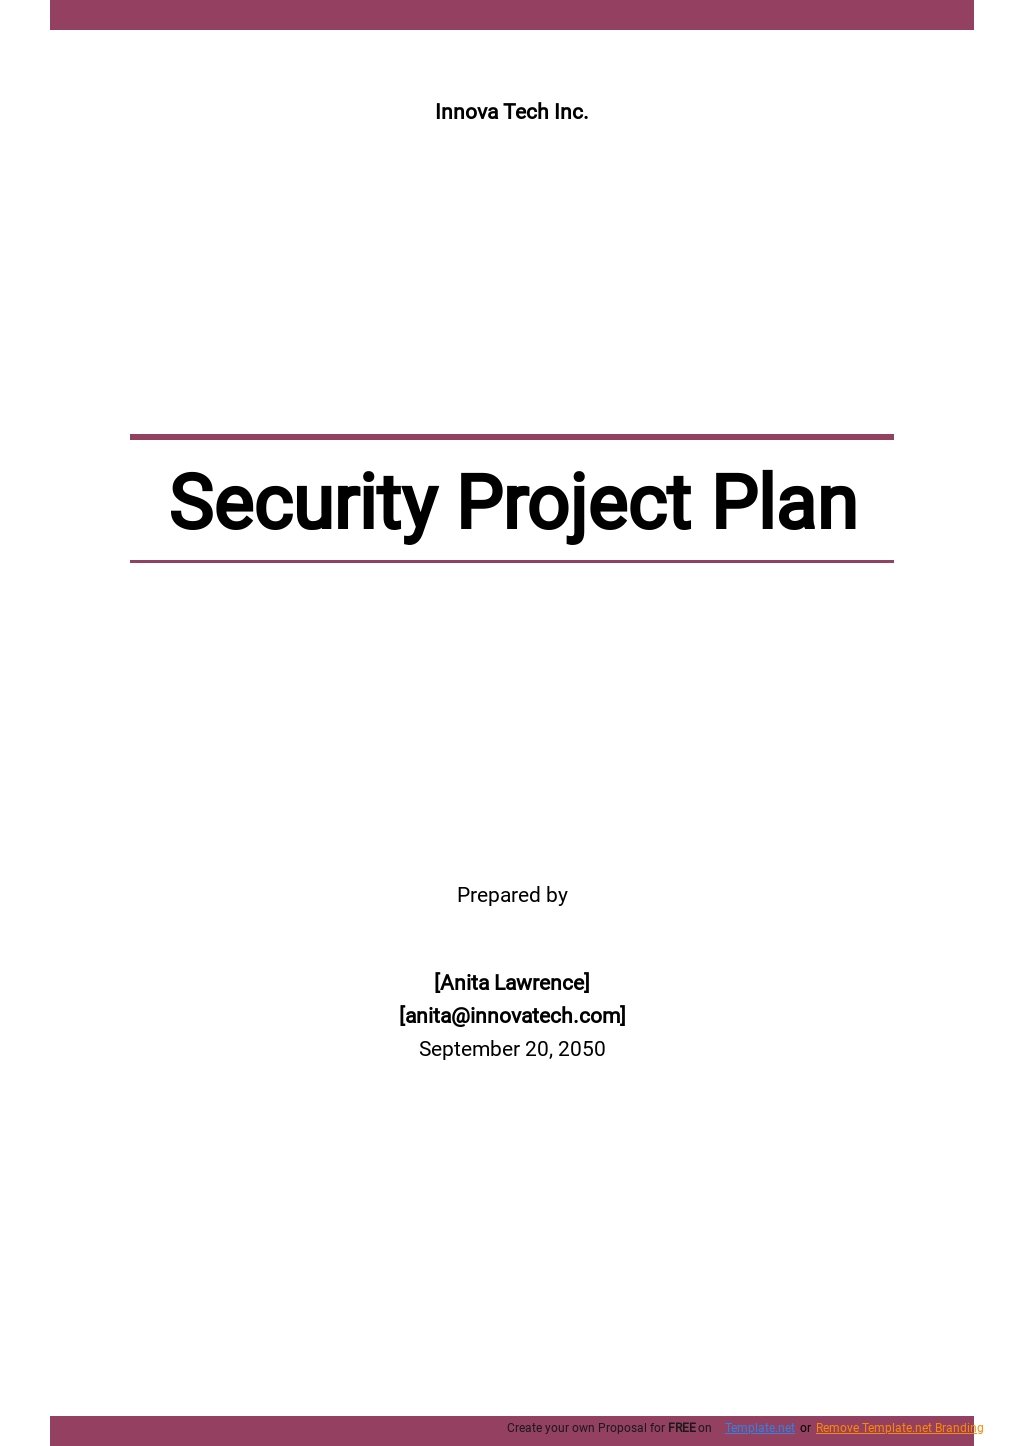 security company business plan template